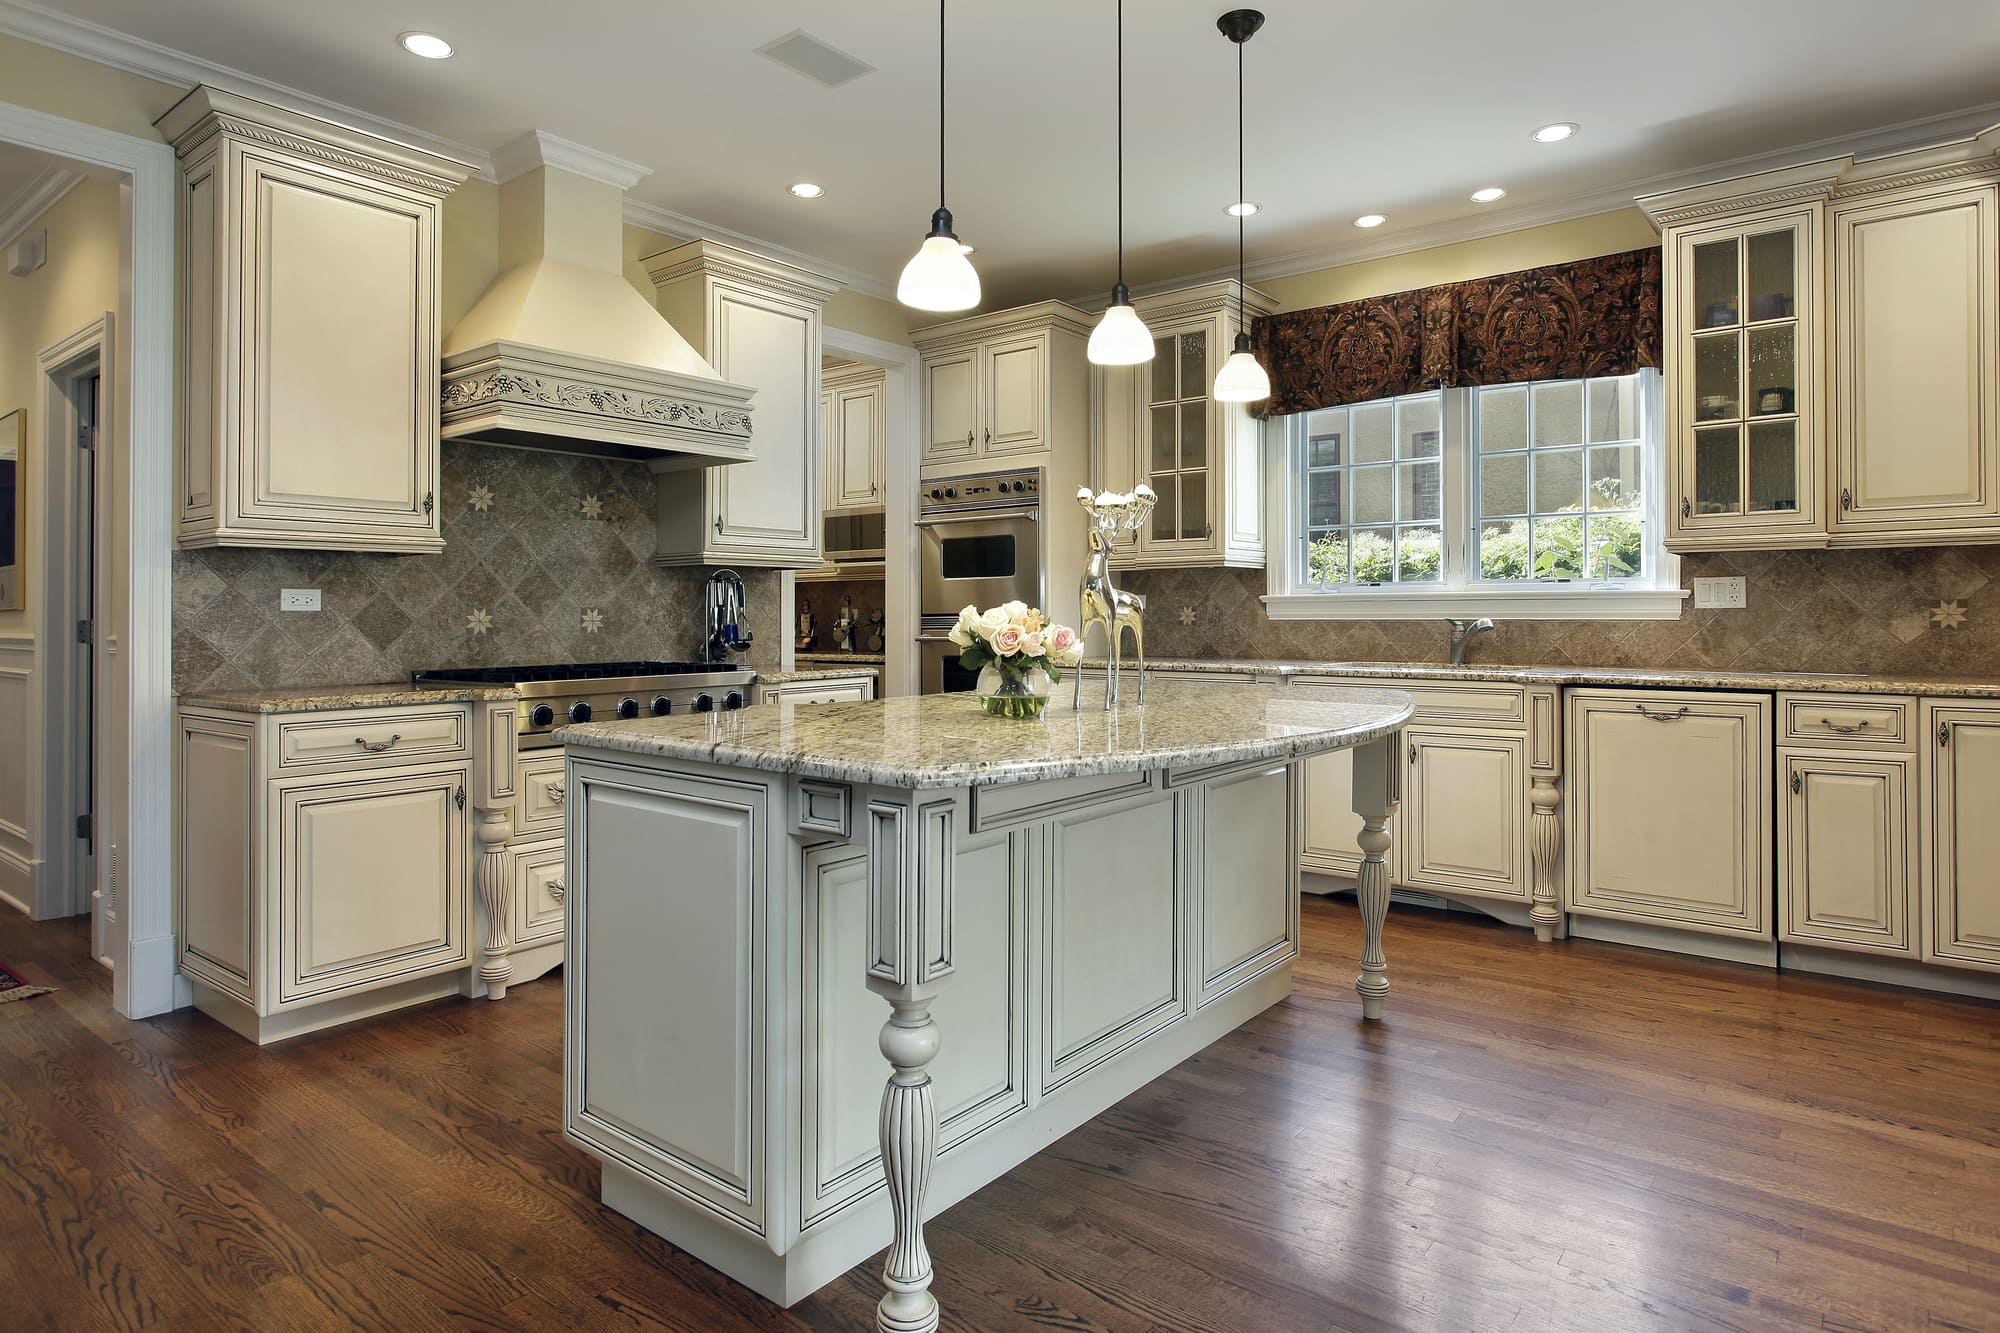 Avoid These Common Mistakes When Painting Kitchen Cabinets